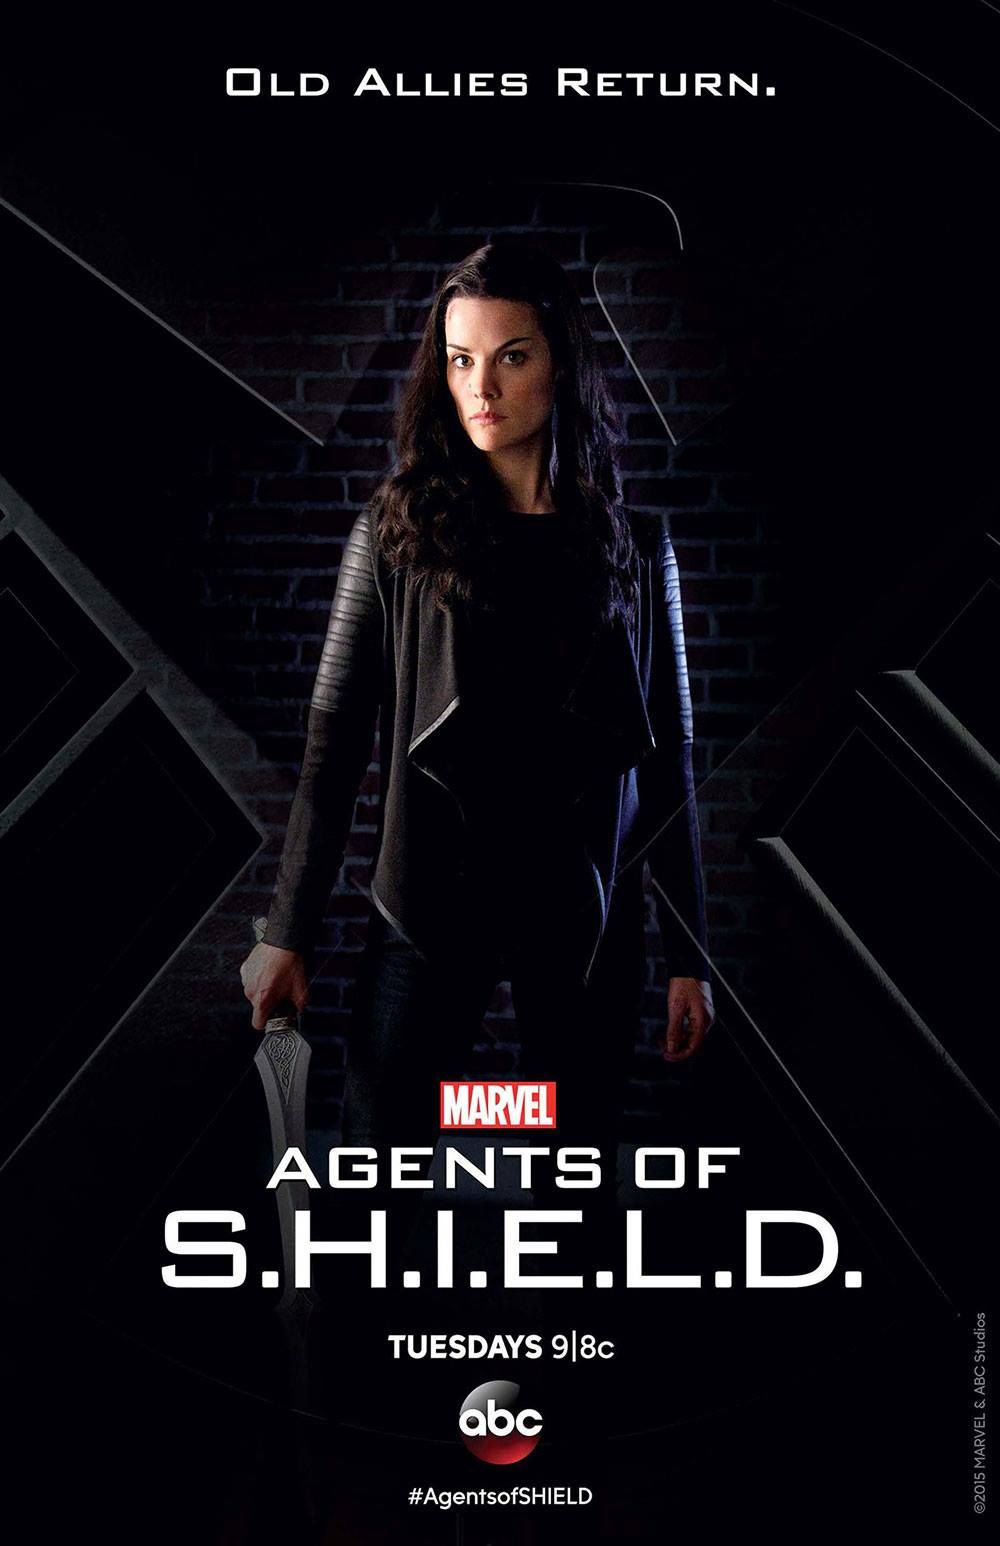 Agents of S.H.I.E.L.D. Lady Sif Poster